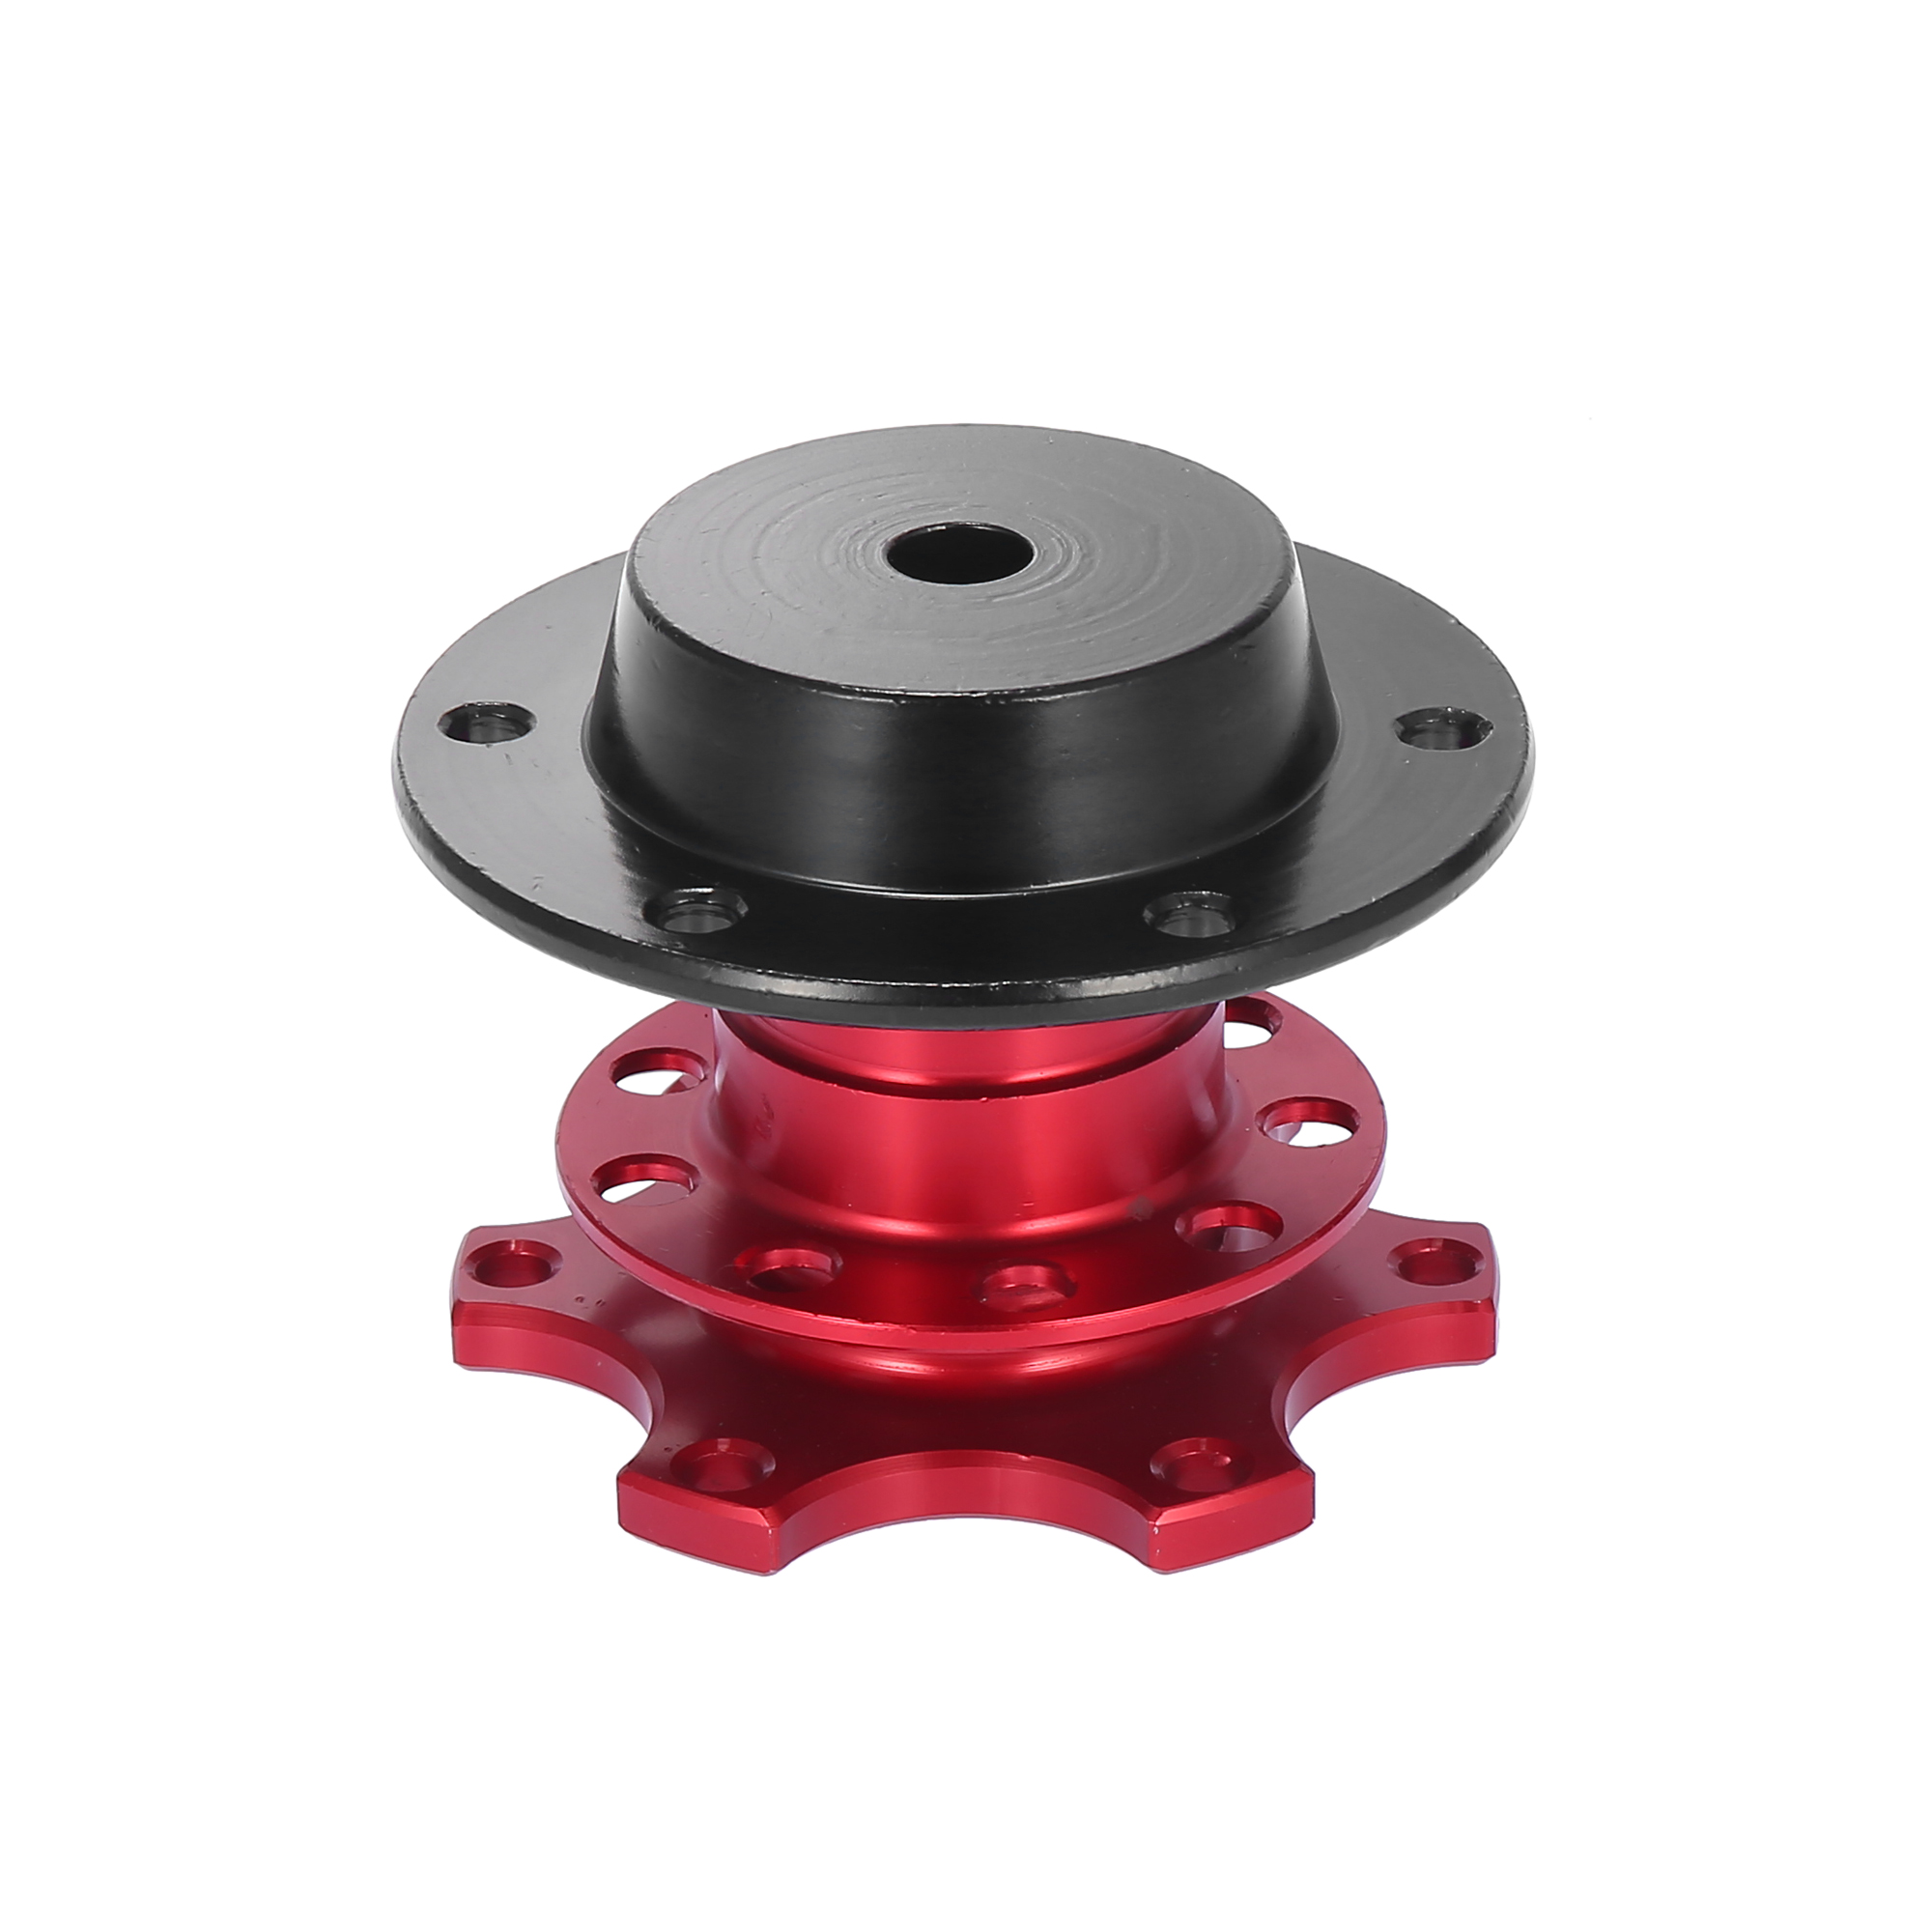 Unique Bargains Universal 6 Hole Car Steering Wheel Hub Adapter Quick Release Boss Kit Red